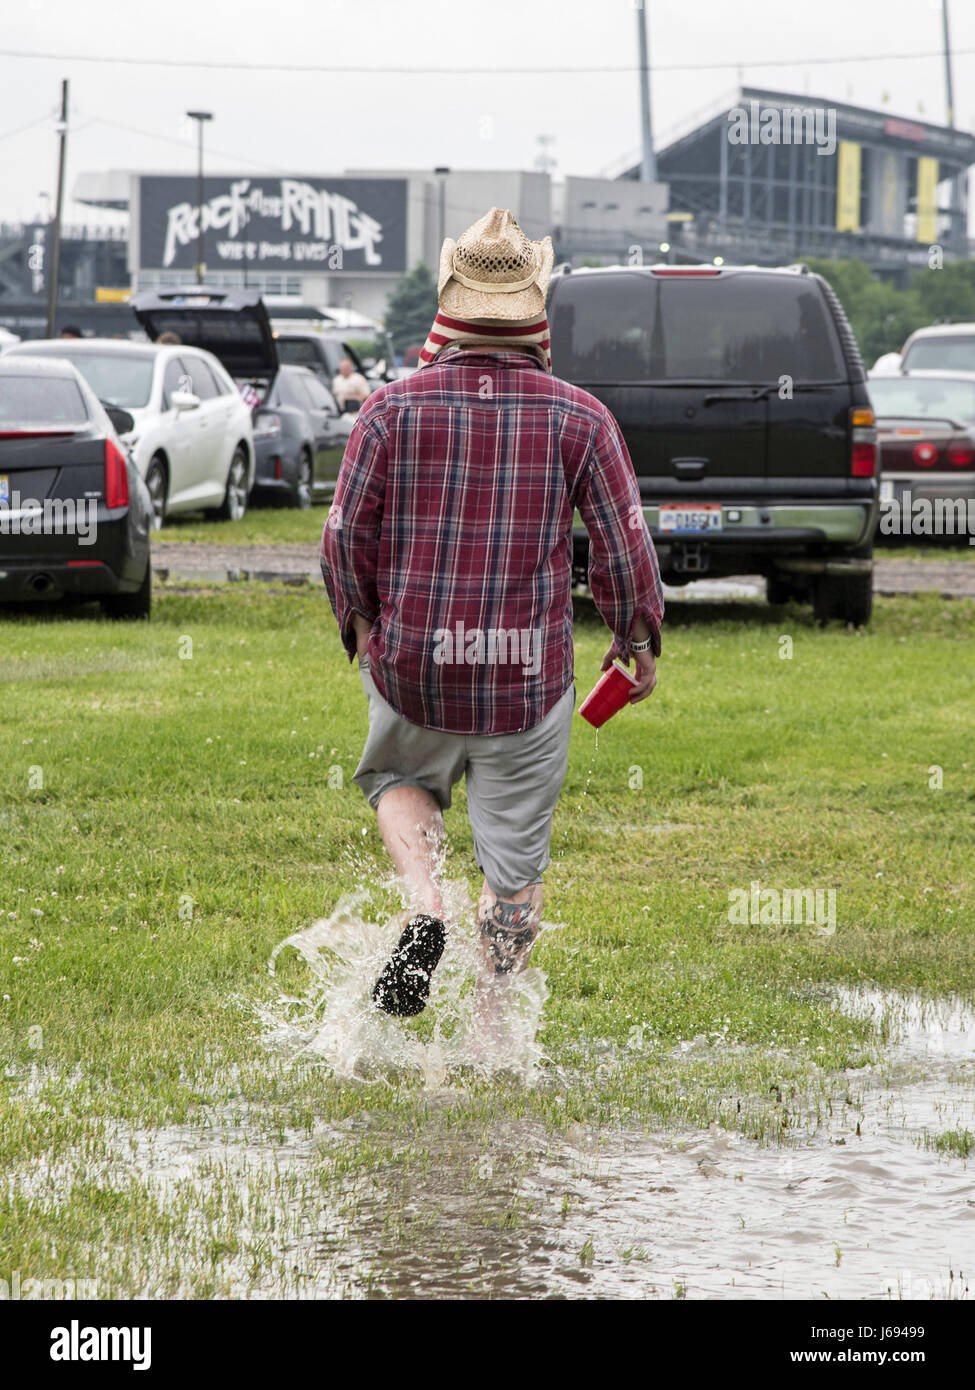 Columbus, OH, USA. 26th Apr, 2015. 19 May 2017 - Columbus, Ohio - Day one of the Rock on the Range music festival at Mapfre Stadium was dampered after severe weather passed through Central Ohio. Festival officials suspened the festival and evacuated the stadium for more than three hours for a storm system that consisted of lightning, rain and high winds. Photo Credit: Devin Simmons/AdMedia Credit: Devin Simmons/AdMedia/ZUMA Wire/Alamy Live News Stock Photo